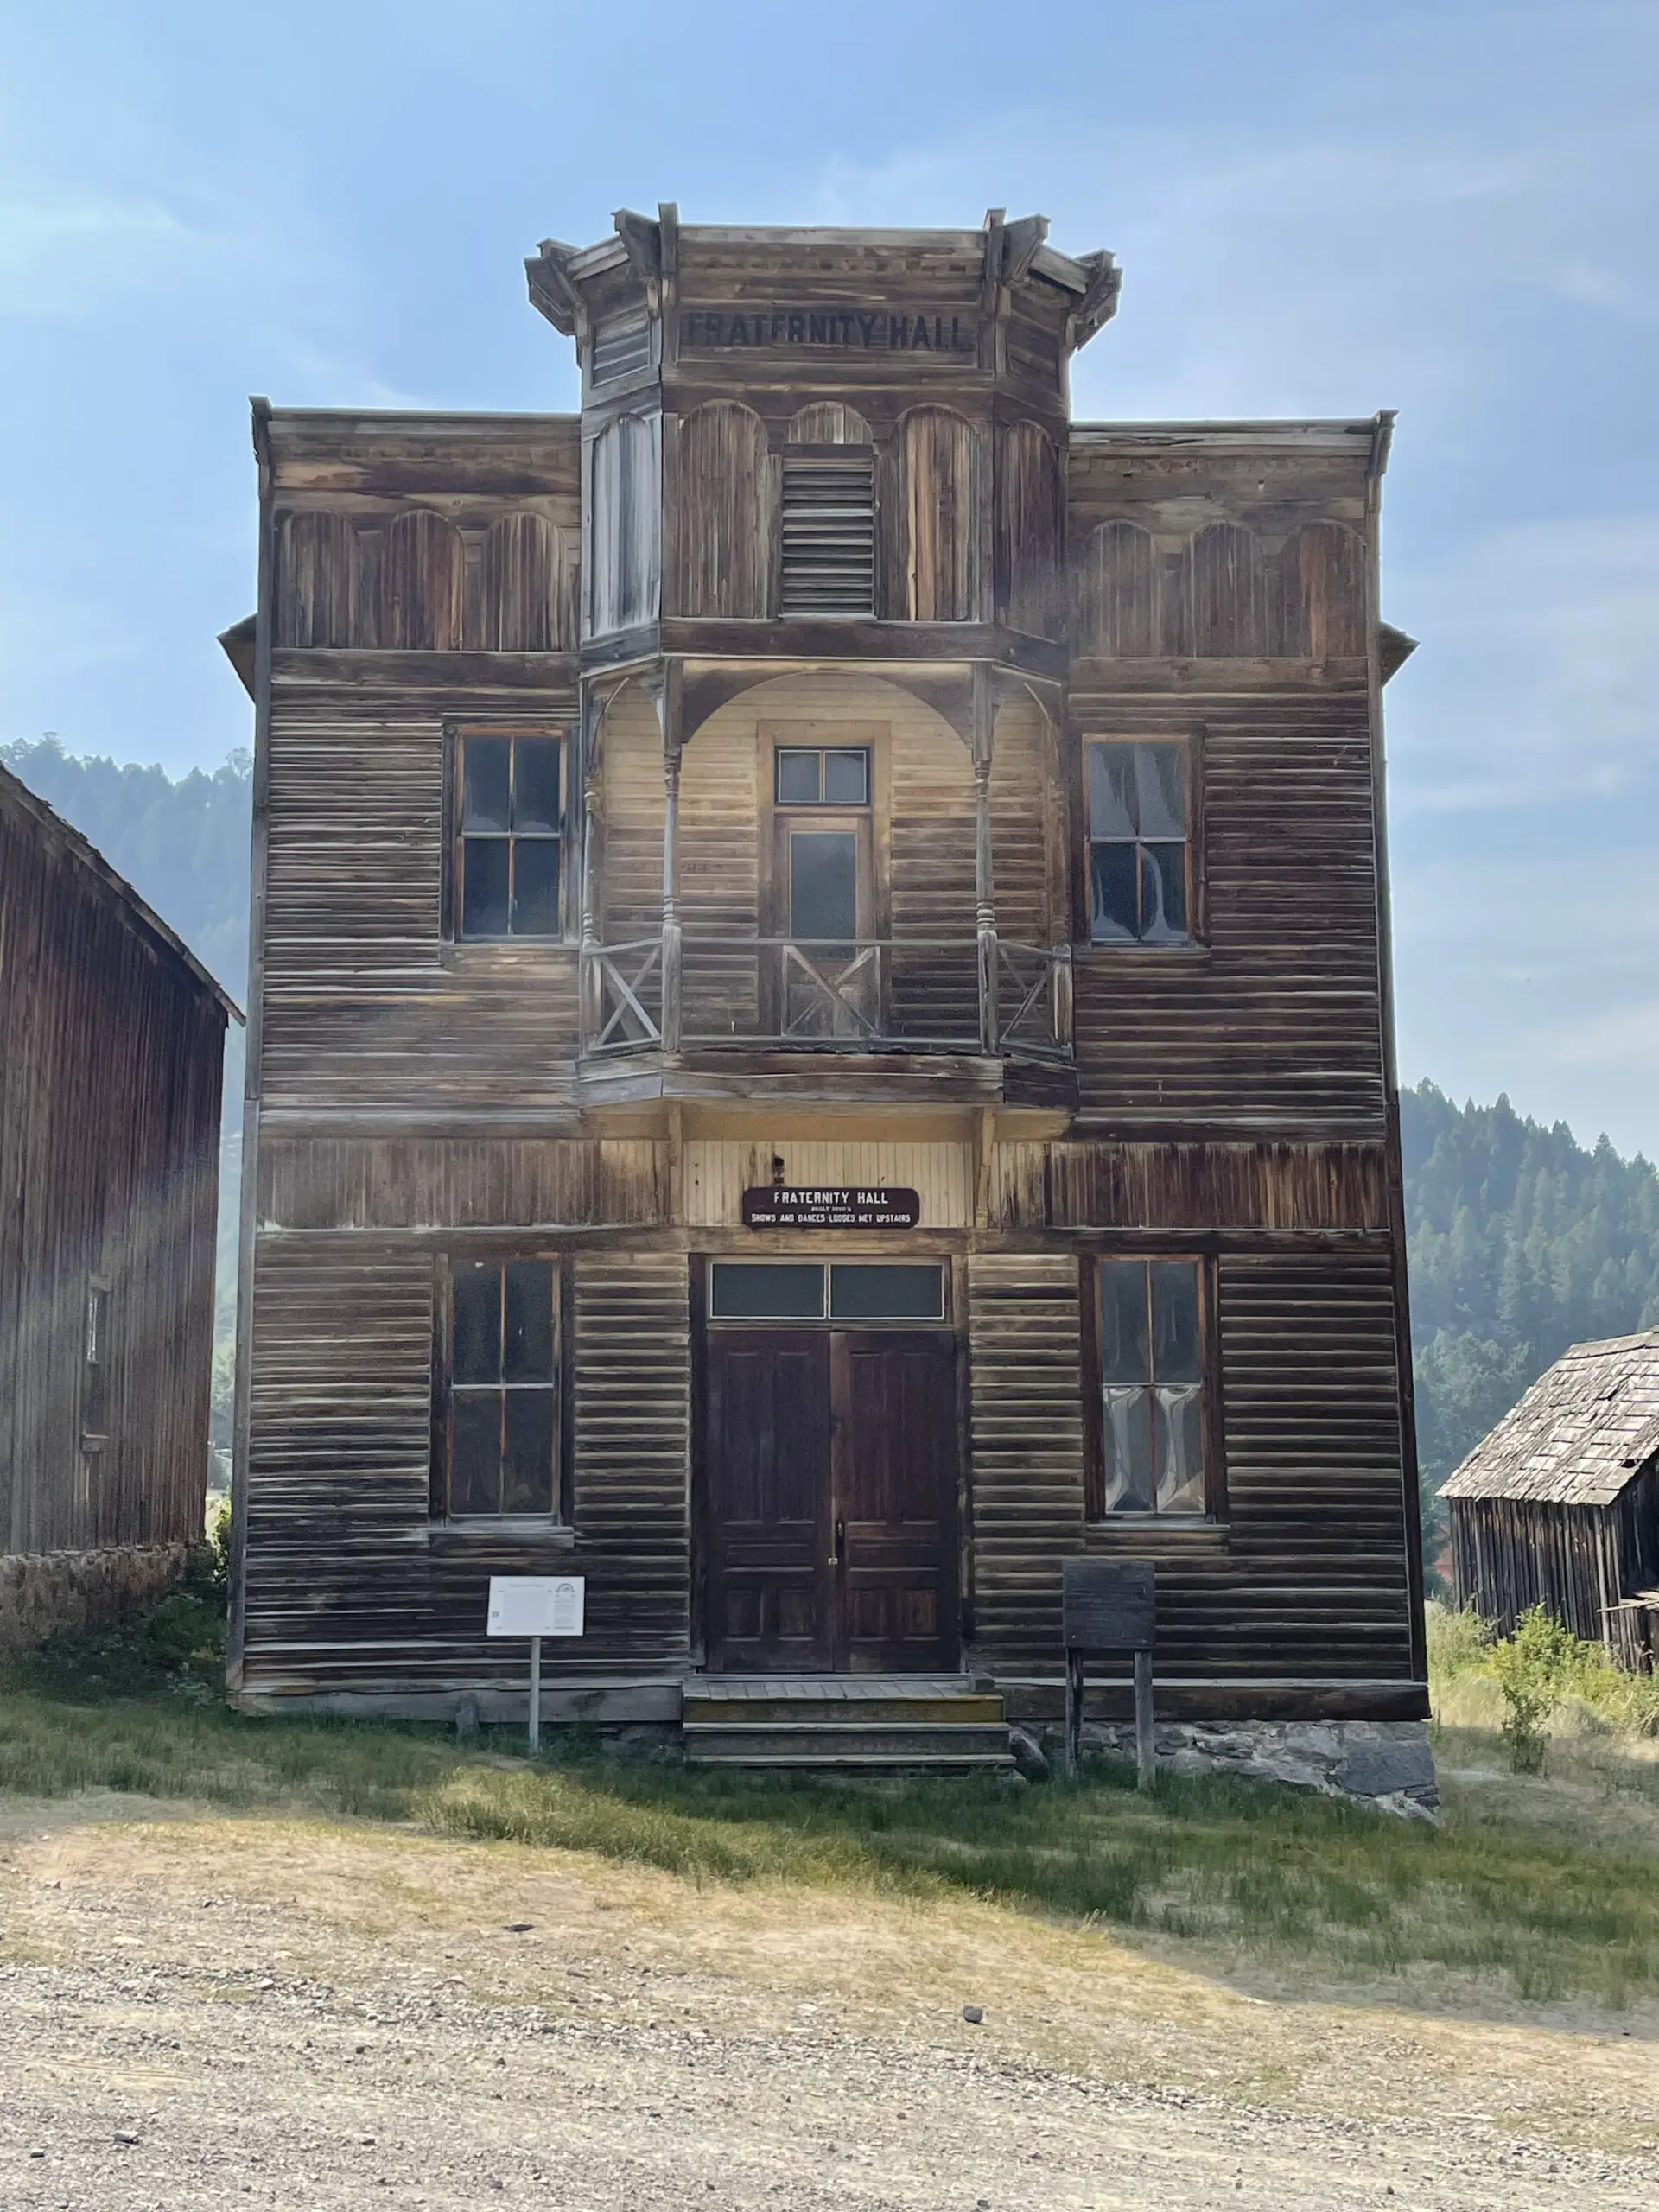 Old, wooden building